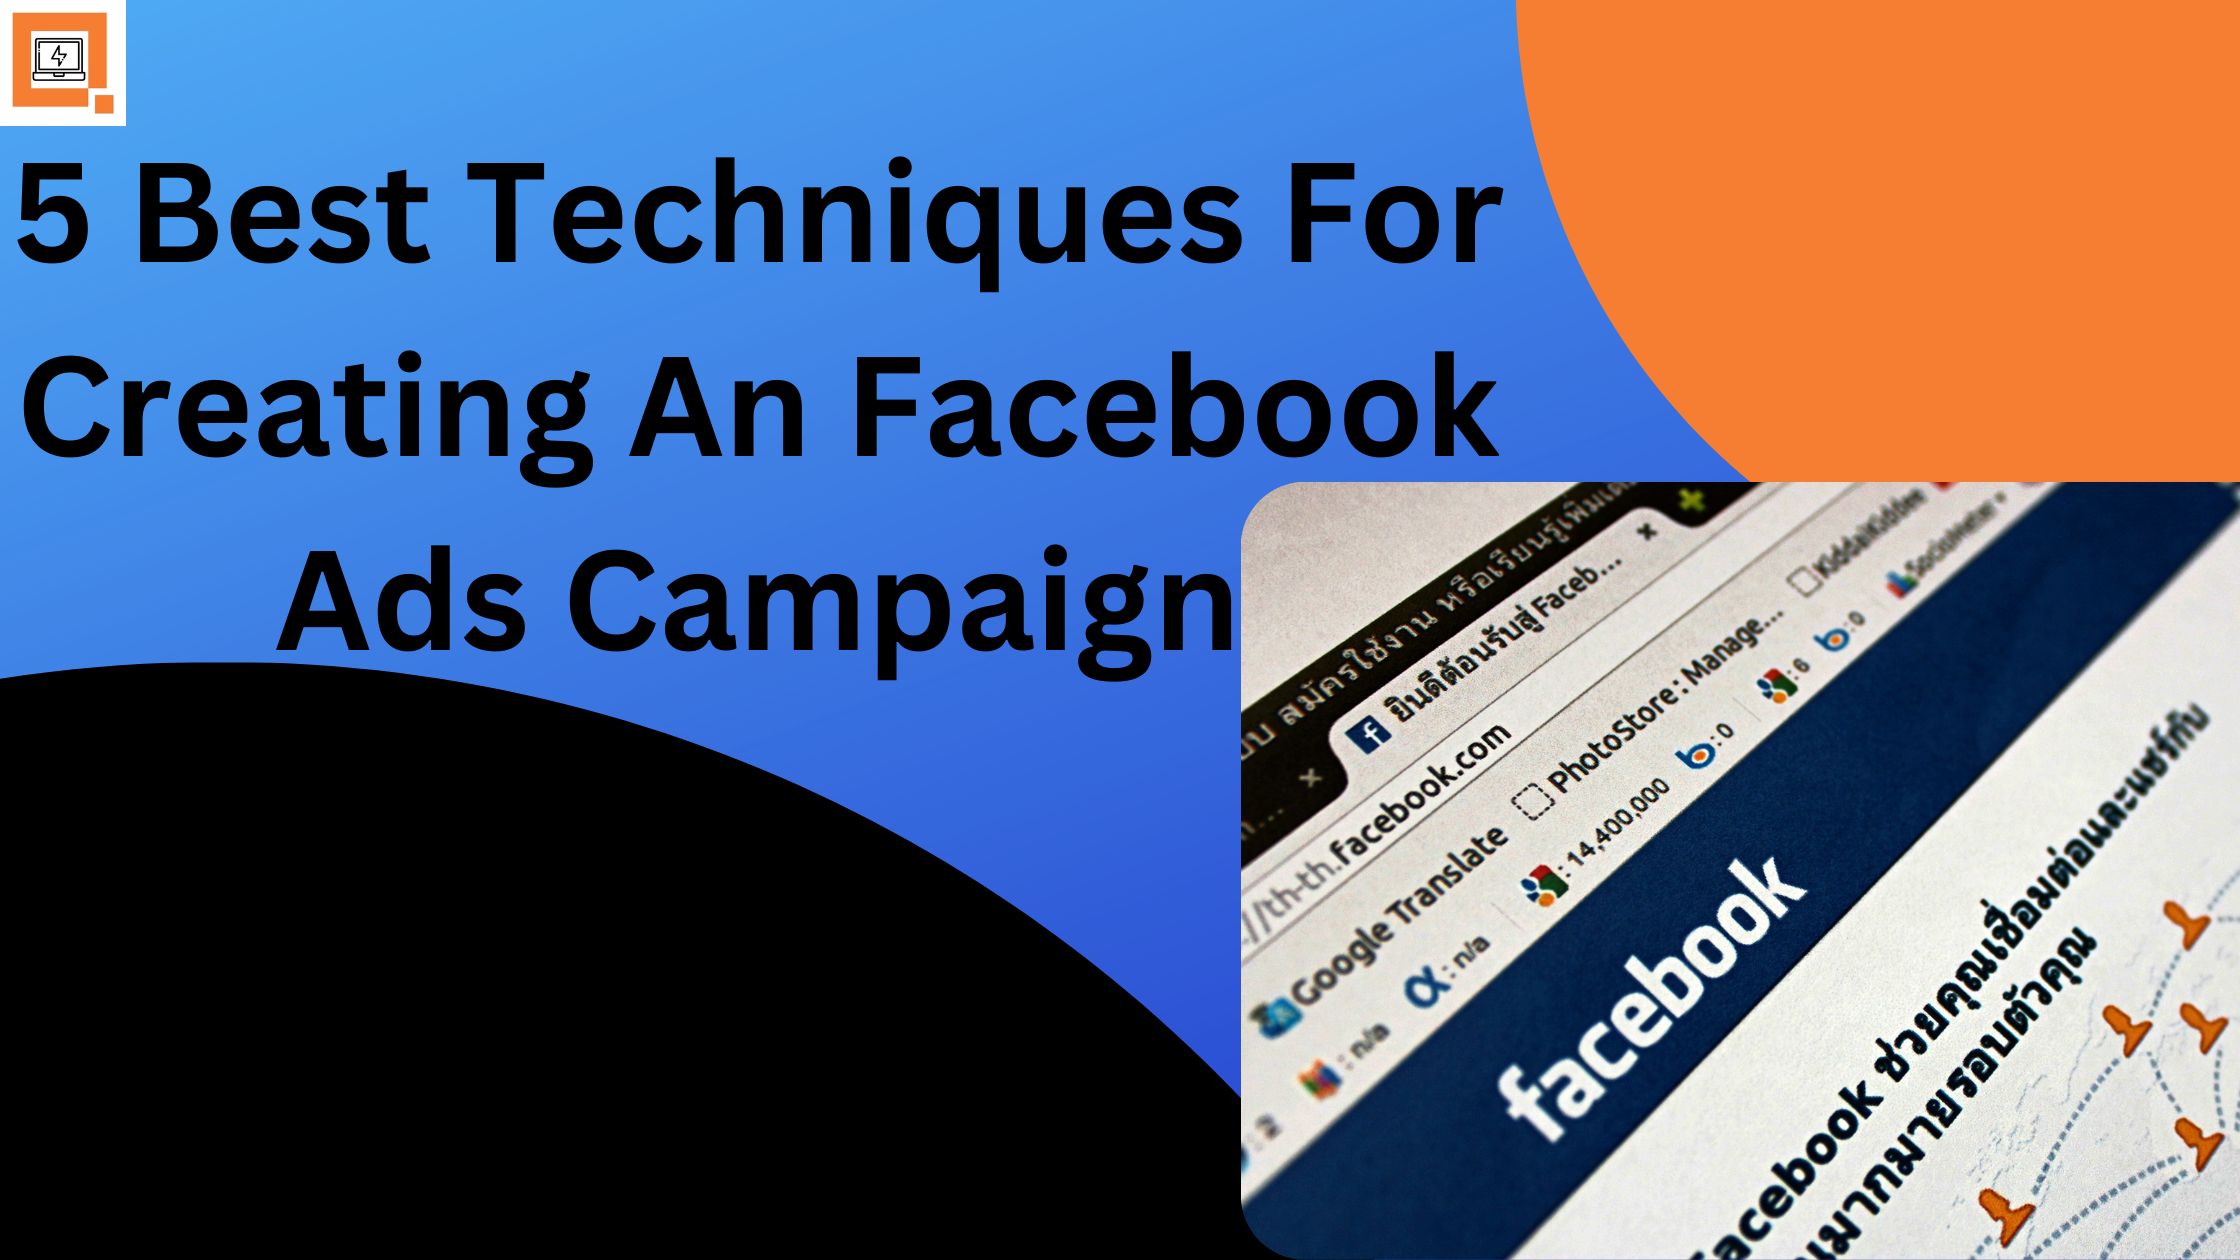 You are currently viewing 5 Best Techniques For Creating An Facebook Ads Campaign